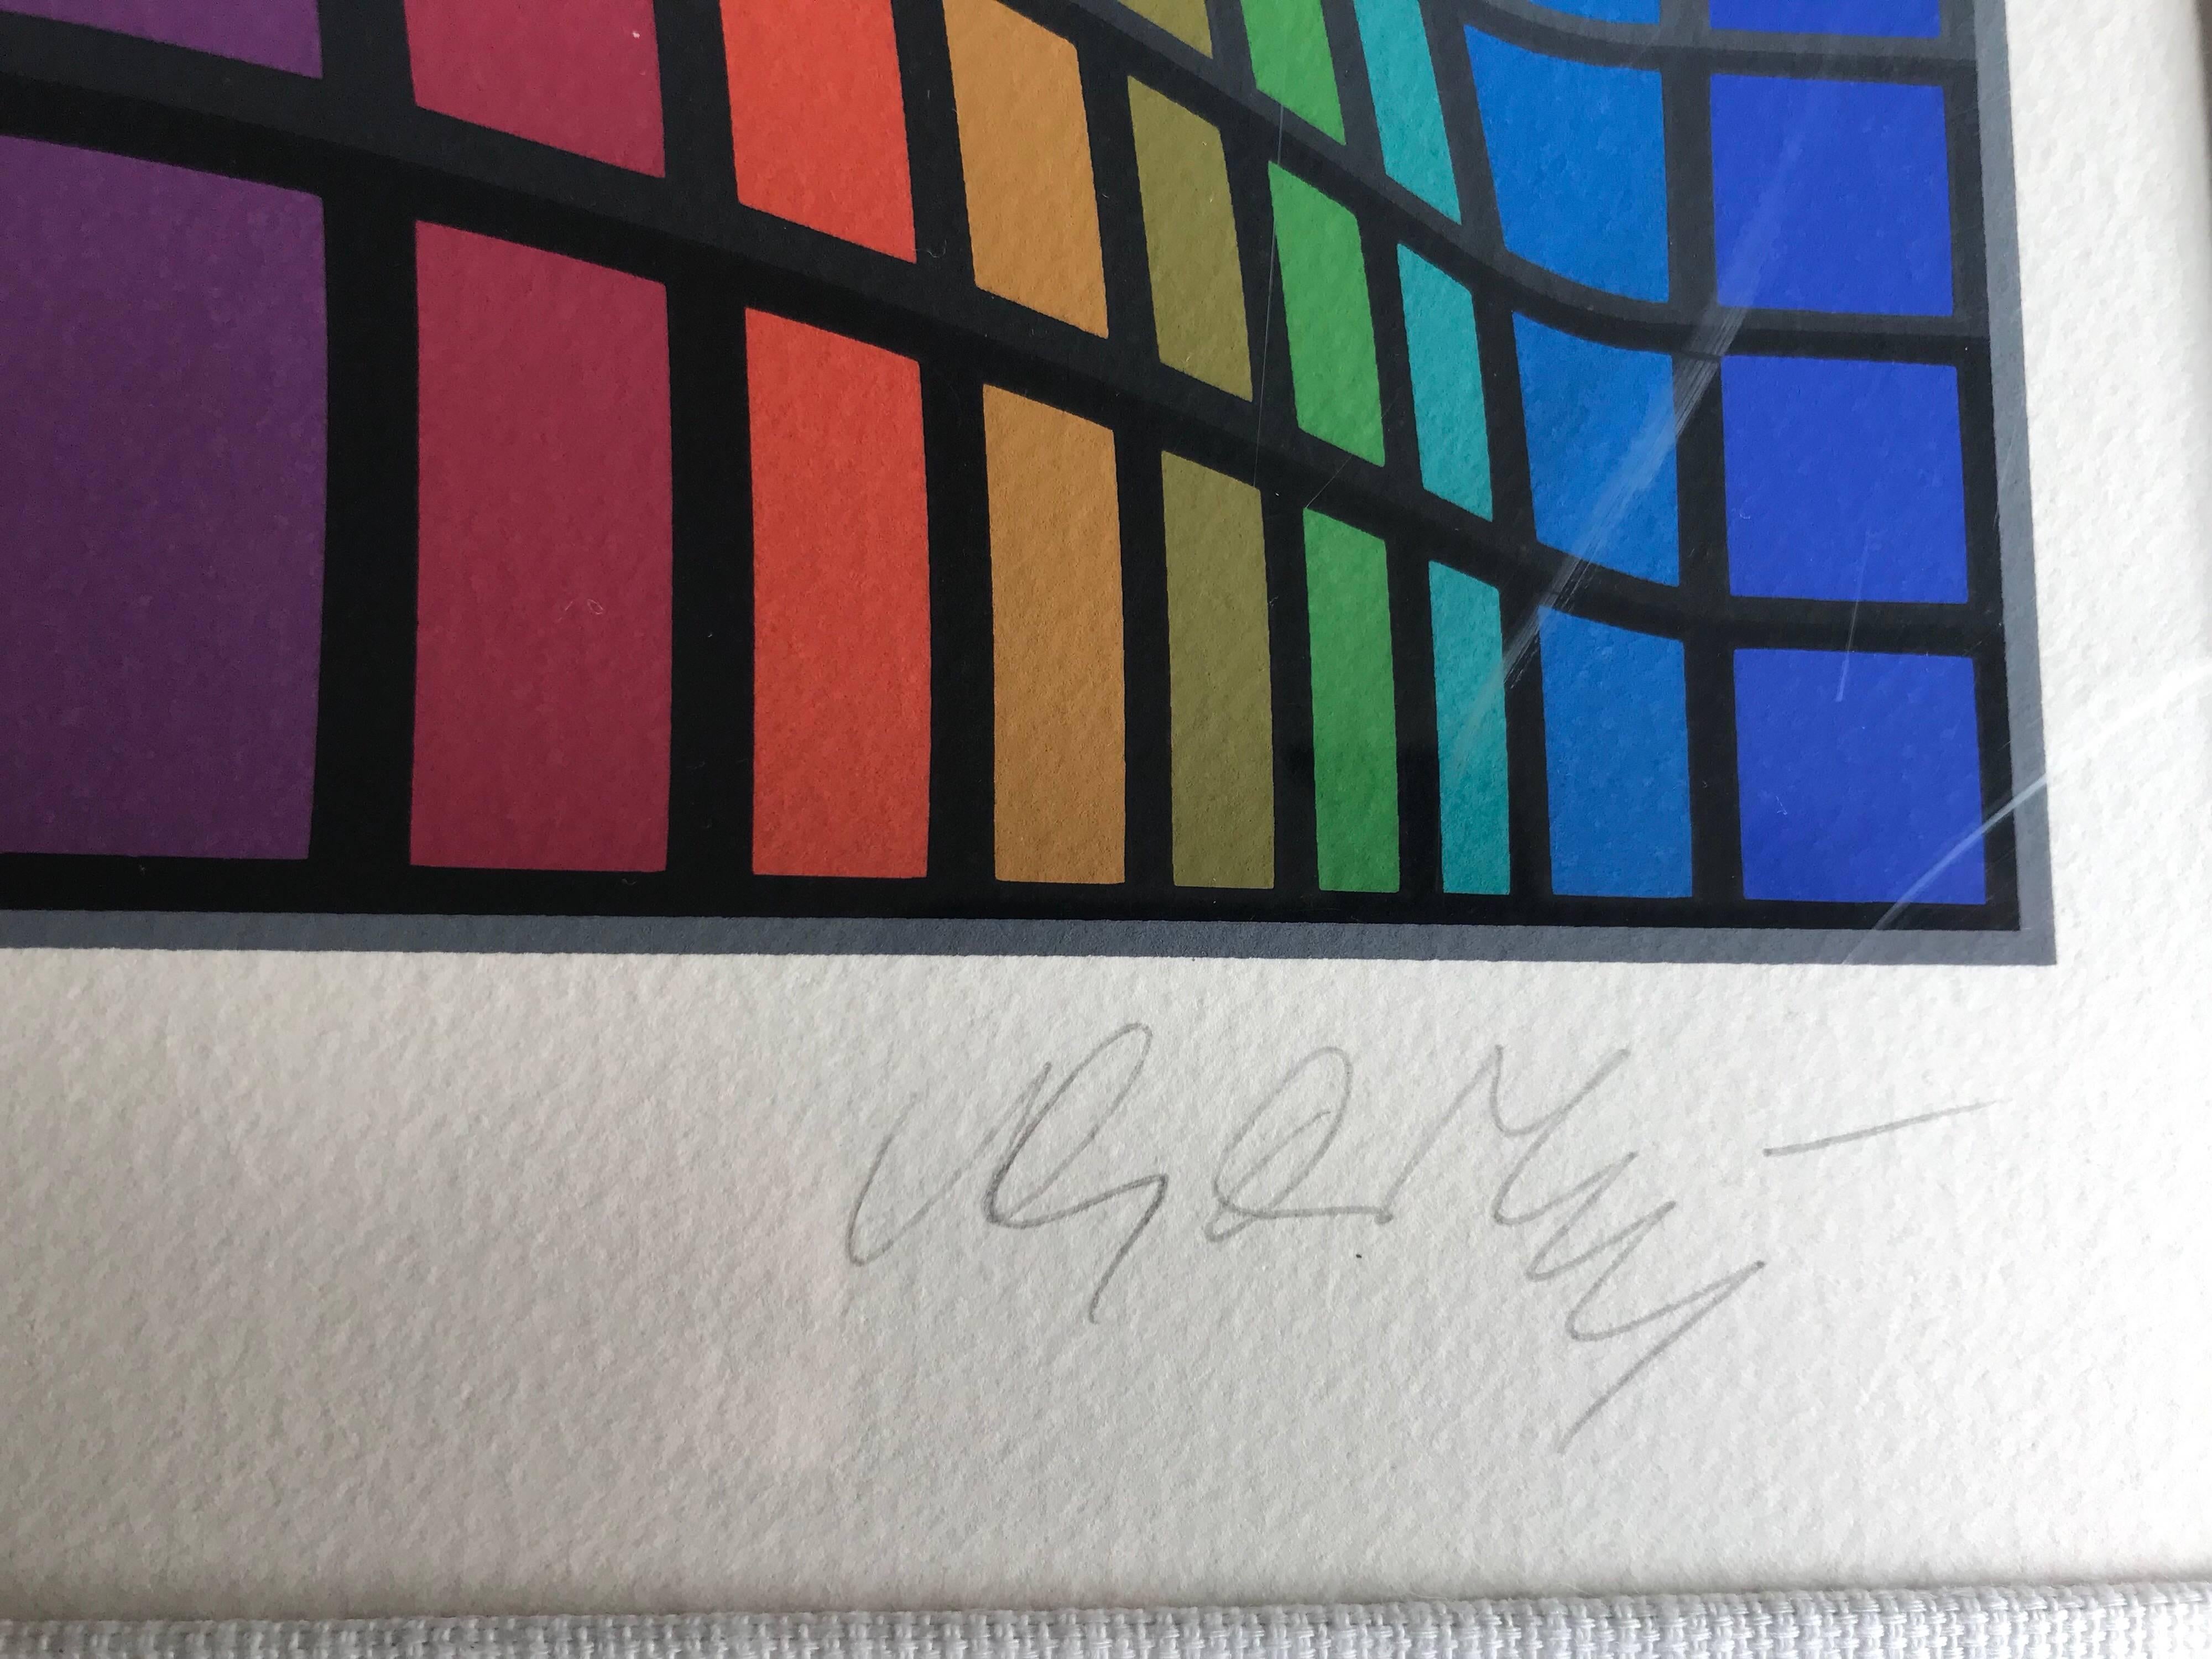 1906-1997
A fun modernist design.
Number 5 of 250.
Signed in pencil.
Ink on paper in the original aluminium frame under plexiglass with linen mat.
The plexiglass has a few scratches.
The print itself is in great condition, colors are still